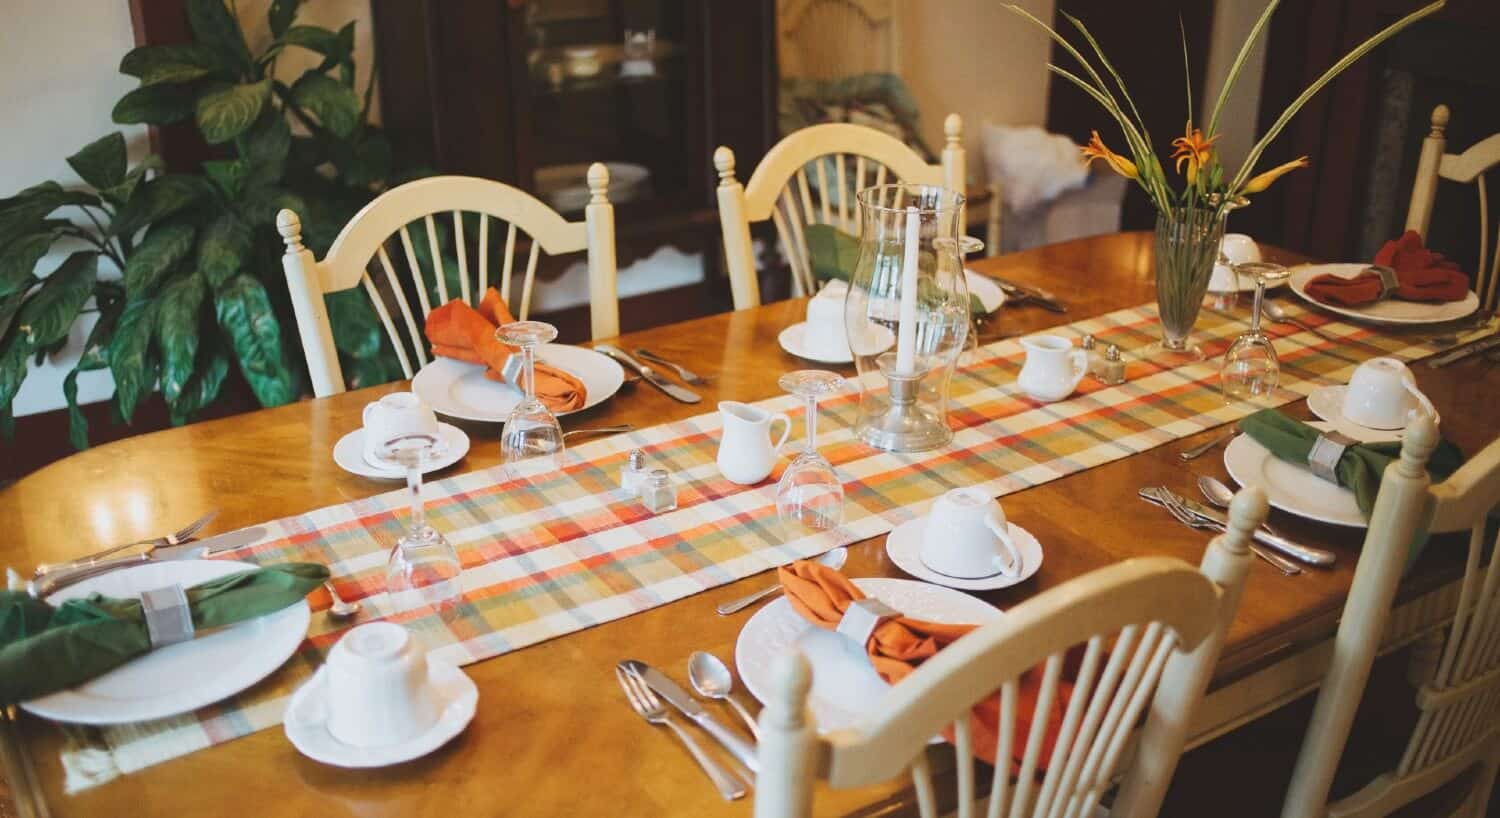 Brown dining table with white chairs with plaid runner and white place settings